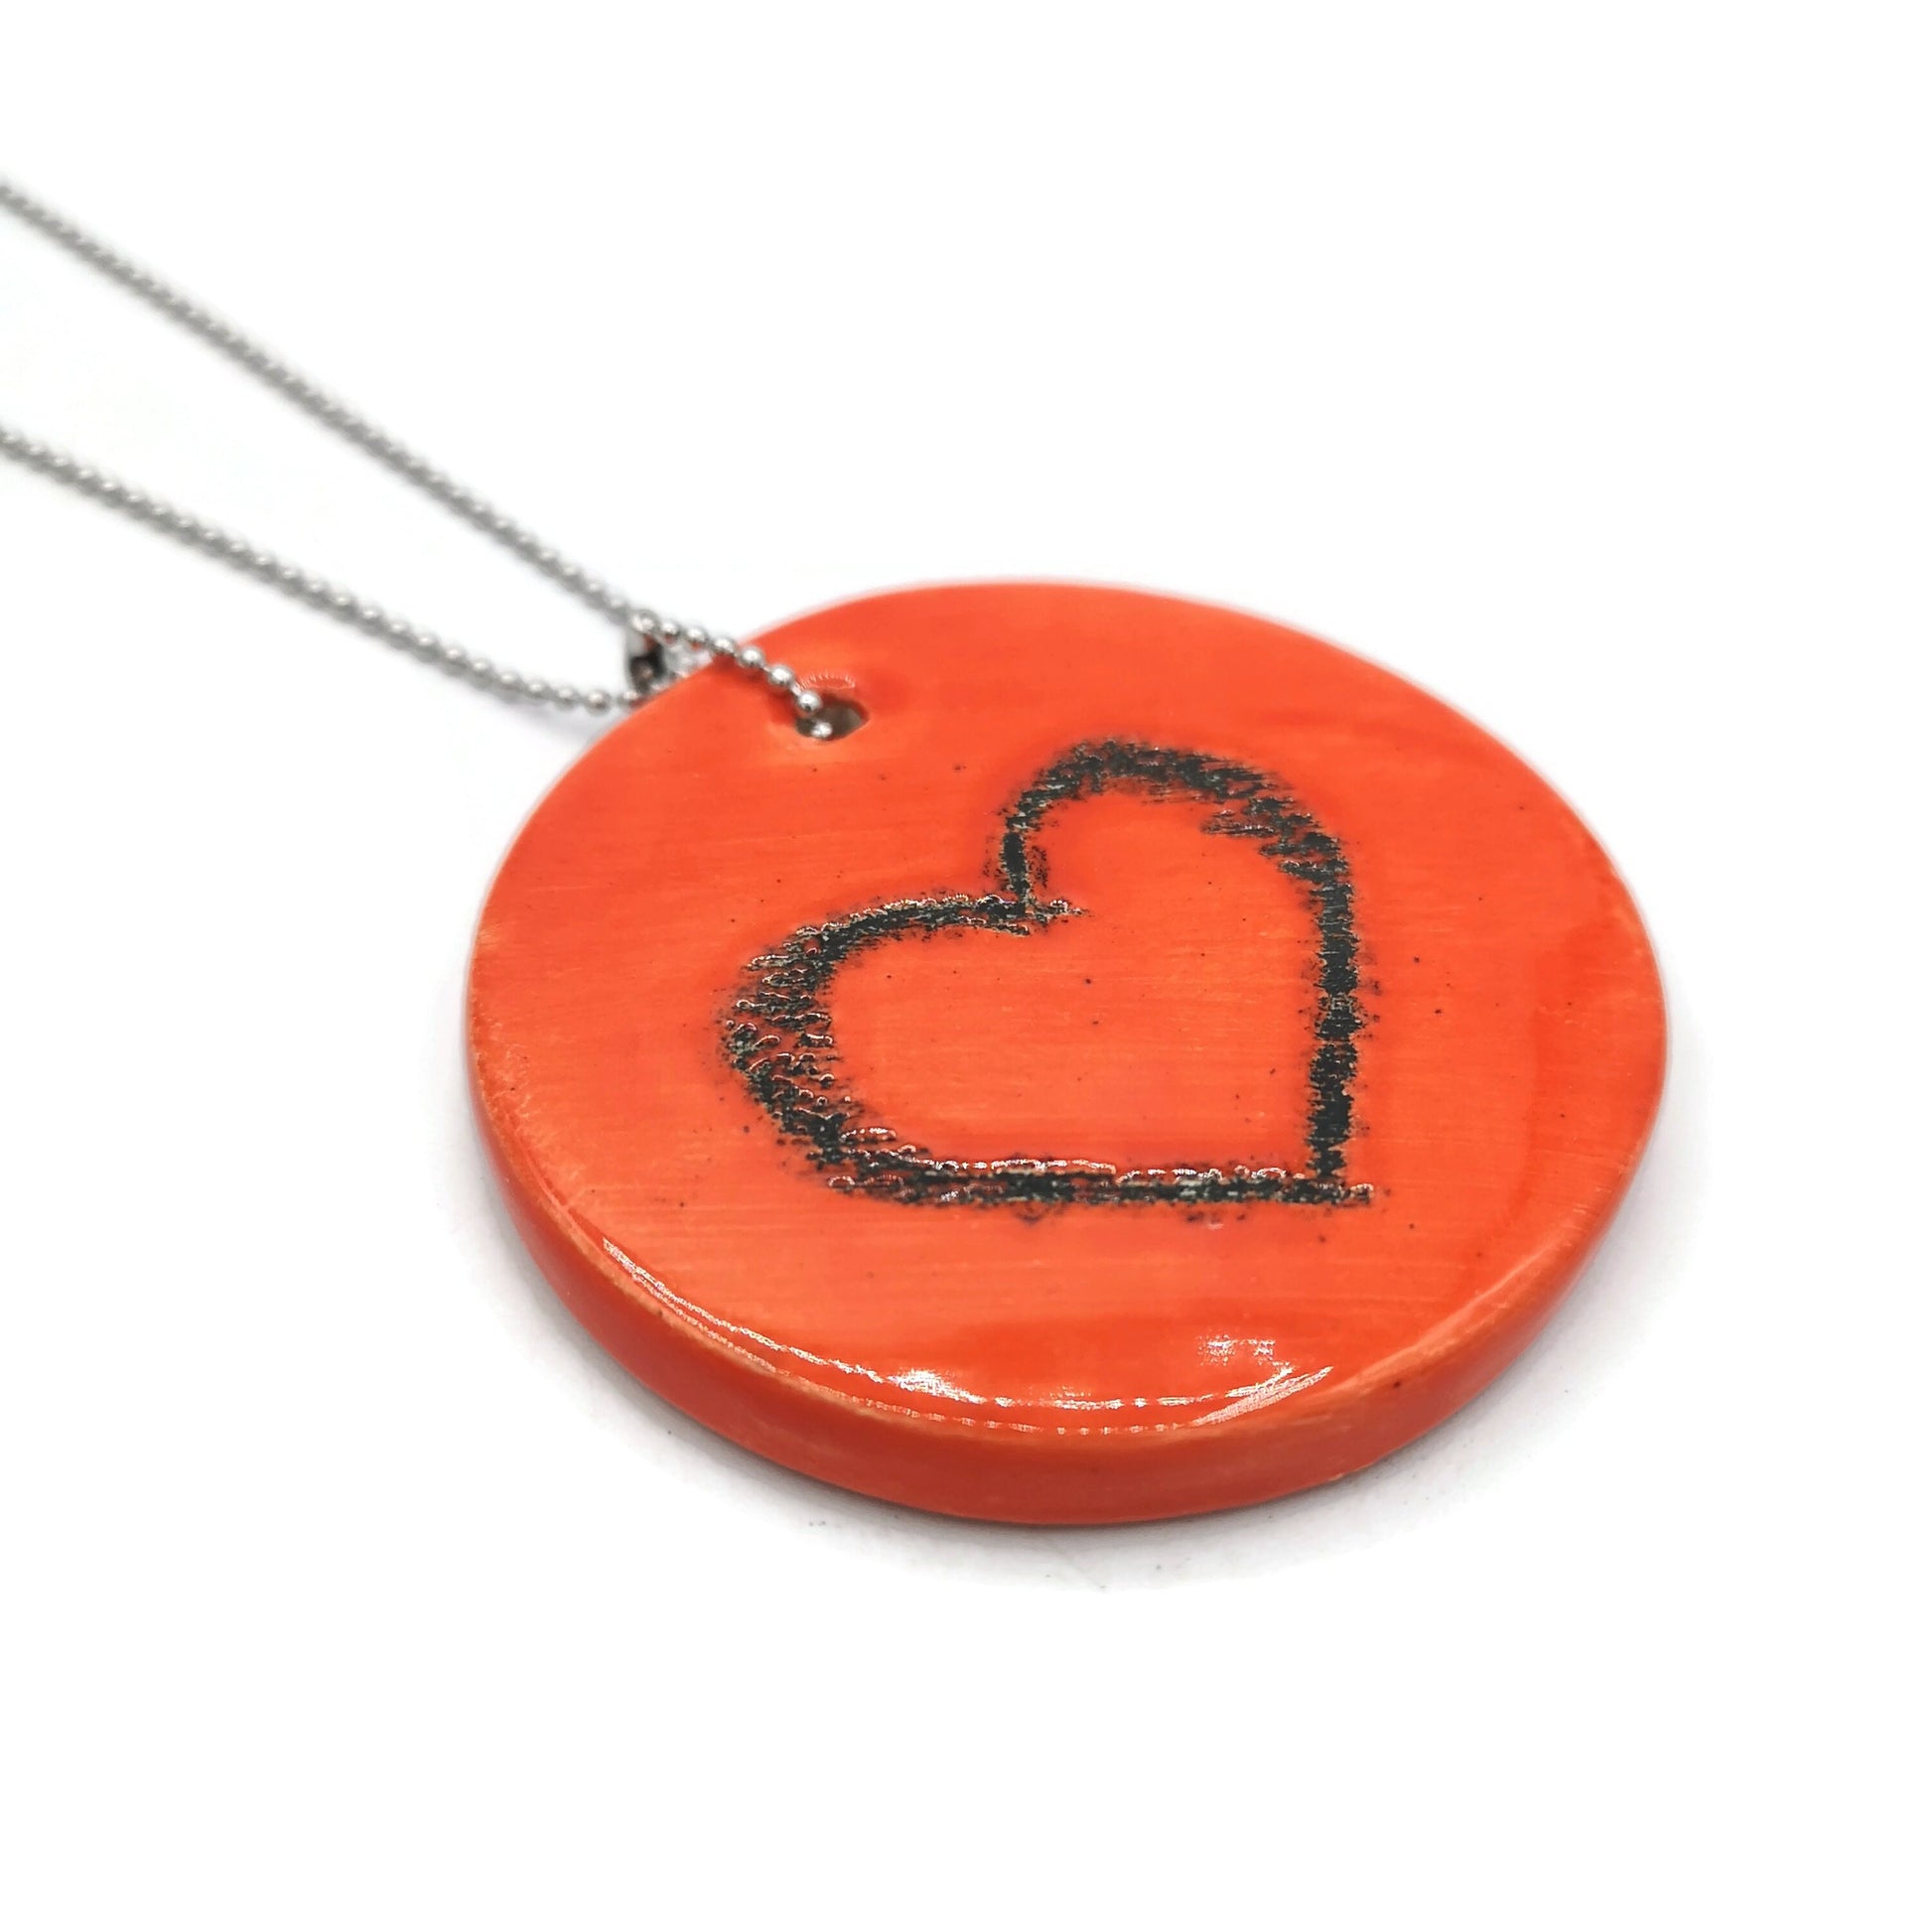 Handmade Ceramic Red Heart Necklace Pendant For Her, Cute Round Pendant, Boho Aesthetic Everyday Necklace, Mothers Day Gift Idea - Ceramica Ana Rafael